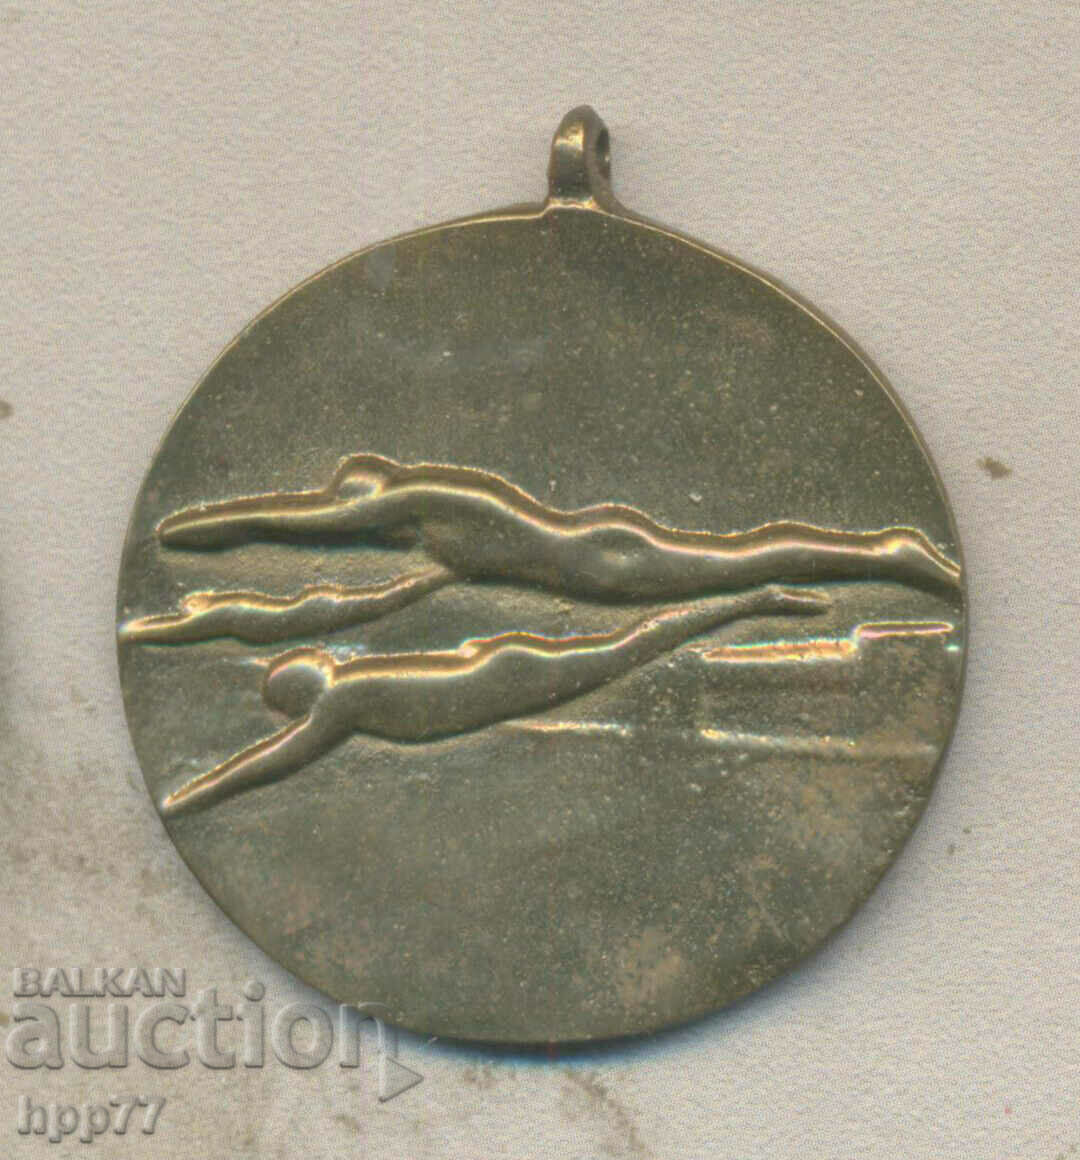 Rare sports award badge medal 1st place 200 meters freestyle